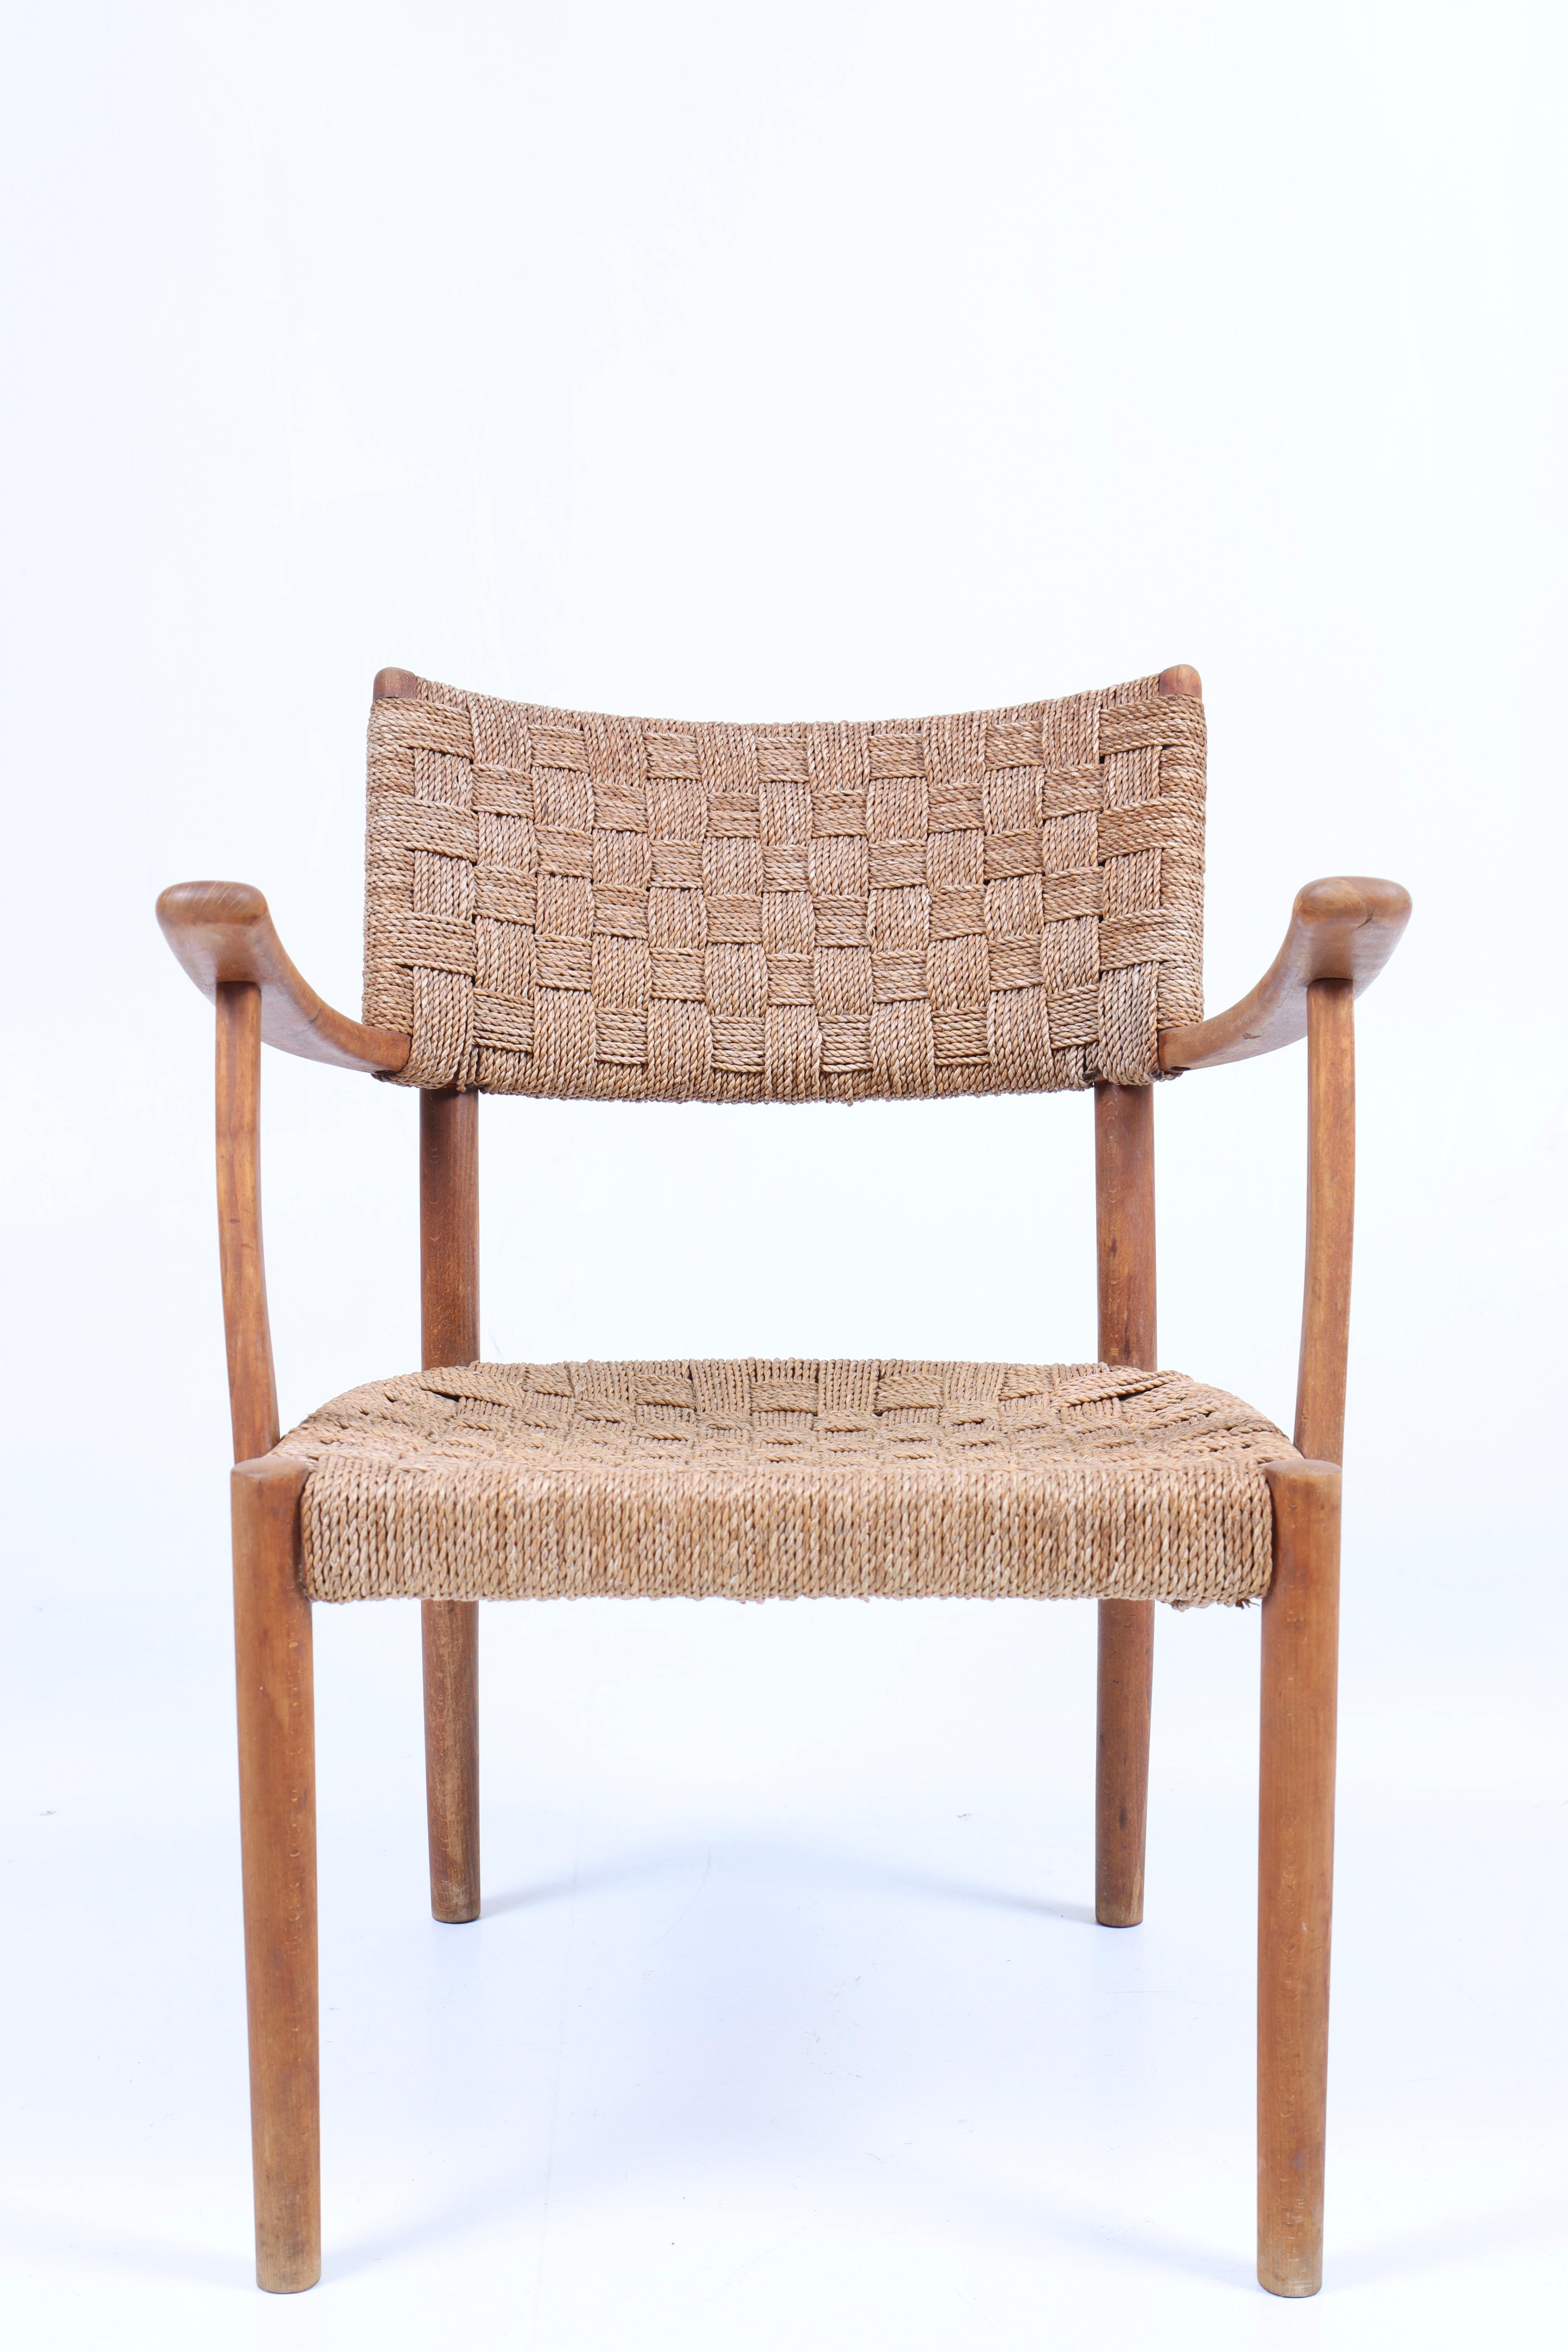 Armchair in beech and seagrass designed and made by cabinetmaker Fritz Hansen in the 1940s.